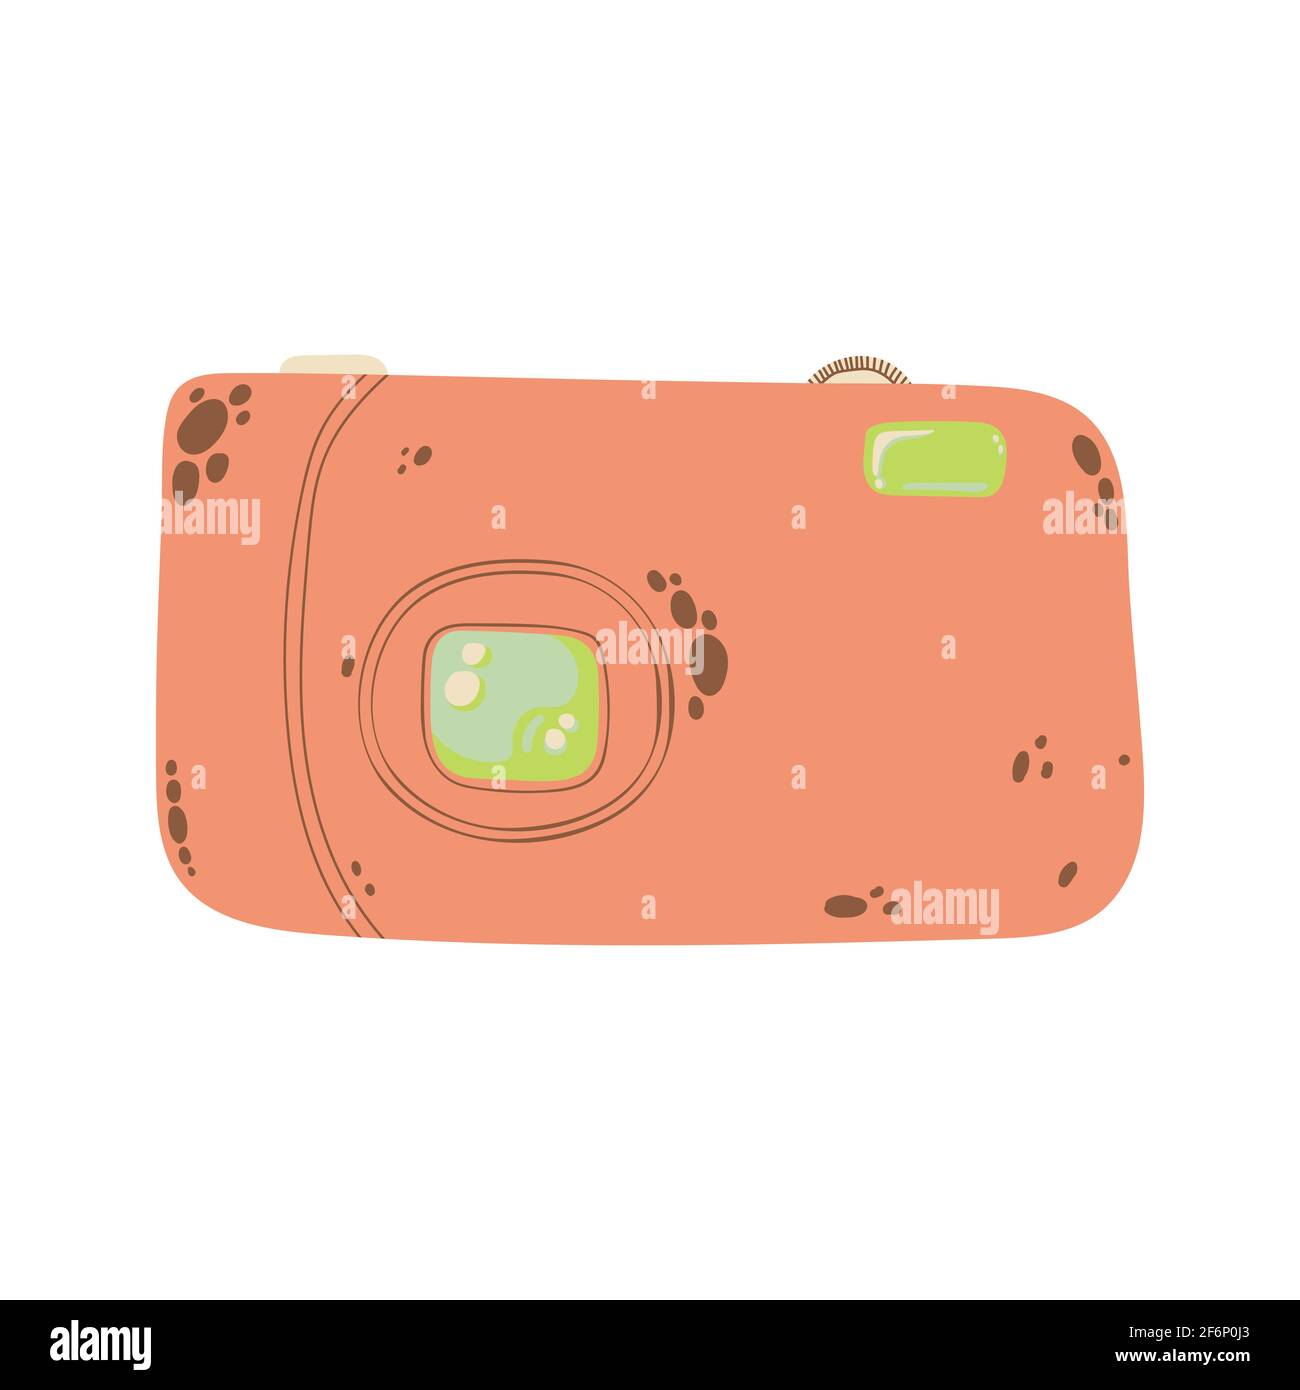 Cute compact photo camera icon in cartoon flat design. Digital camera with battery grip clip art in doodle style. Vector illustration isolated on whit Stock Vector